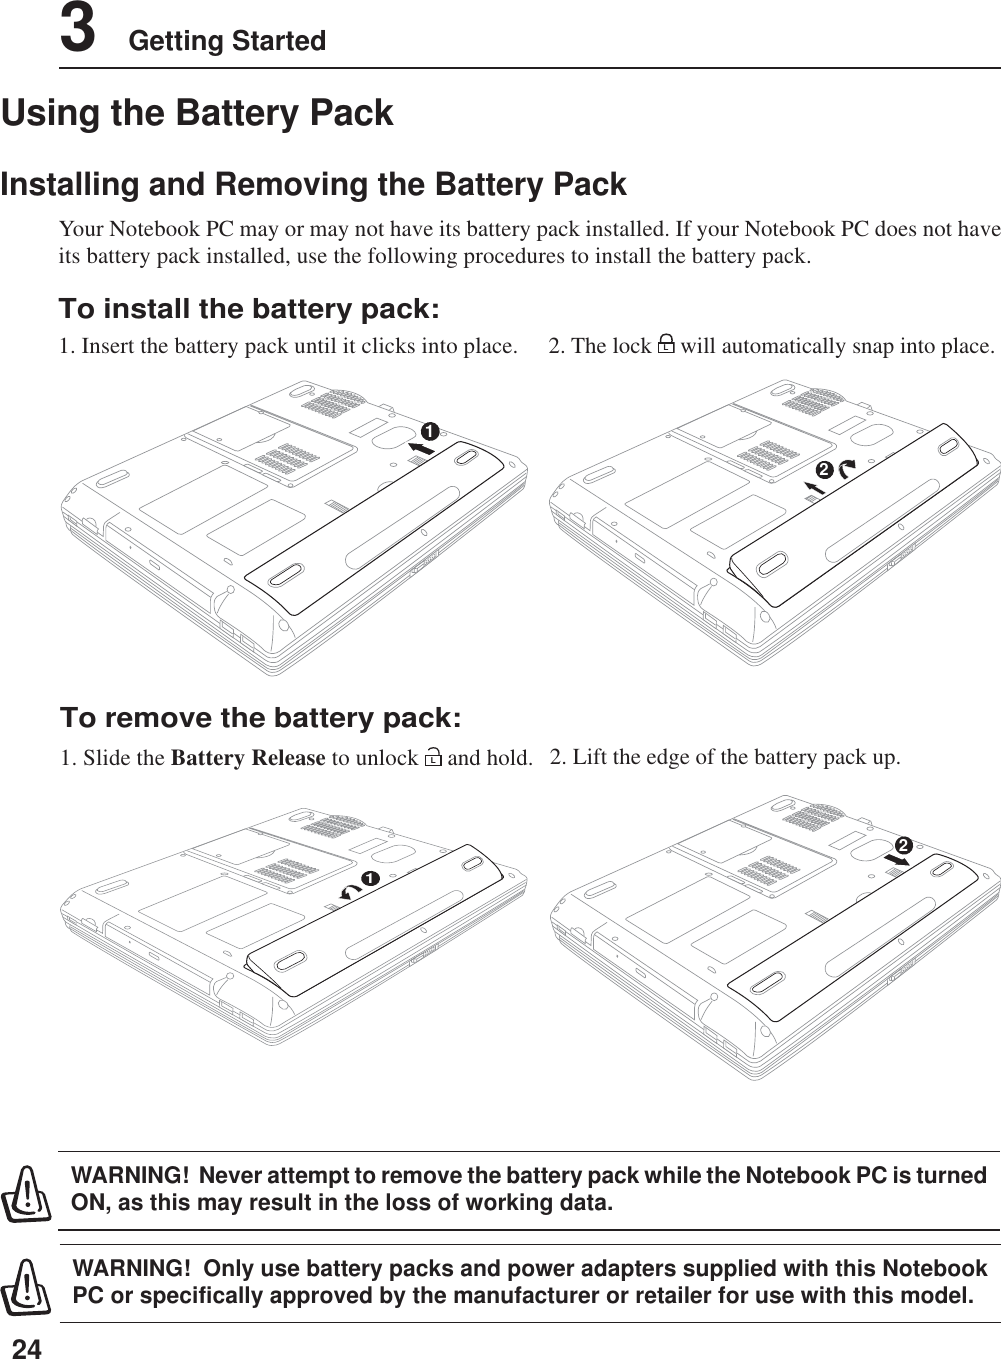 243    Getting Started11Using the Battery PackInstalling and Removing the Battery PackYour Notebook PC may or may not have its battery pack installed. If your Notebook PC does not haveits battery pack installed, use the following procedures to install the battery pack.WARNING!  Only use battery packs and power adapters supplied with this NotebookPC or specifically approved by the manufacturer or retailer for use with this model.WARNING!  Never attempt to remove the battery pack while the Notebook PC is turnedON, as this may result in the loss of working data.To install the battery pack:1. Insert the battery pack until it clicks into place.To remove the battery pack:1. Slide the Battery Release to unlock L and hold. 2. Lift the edge of the battery pack up.2. The lock L will automatically snap into place.22